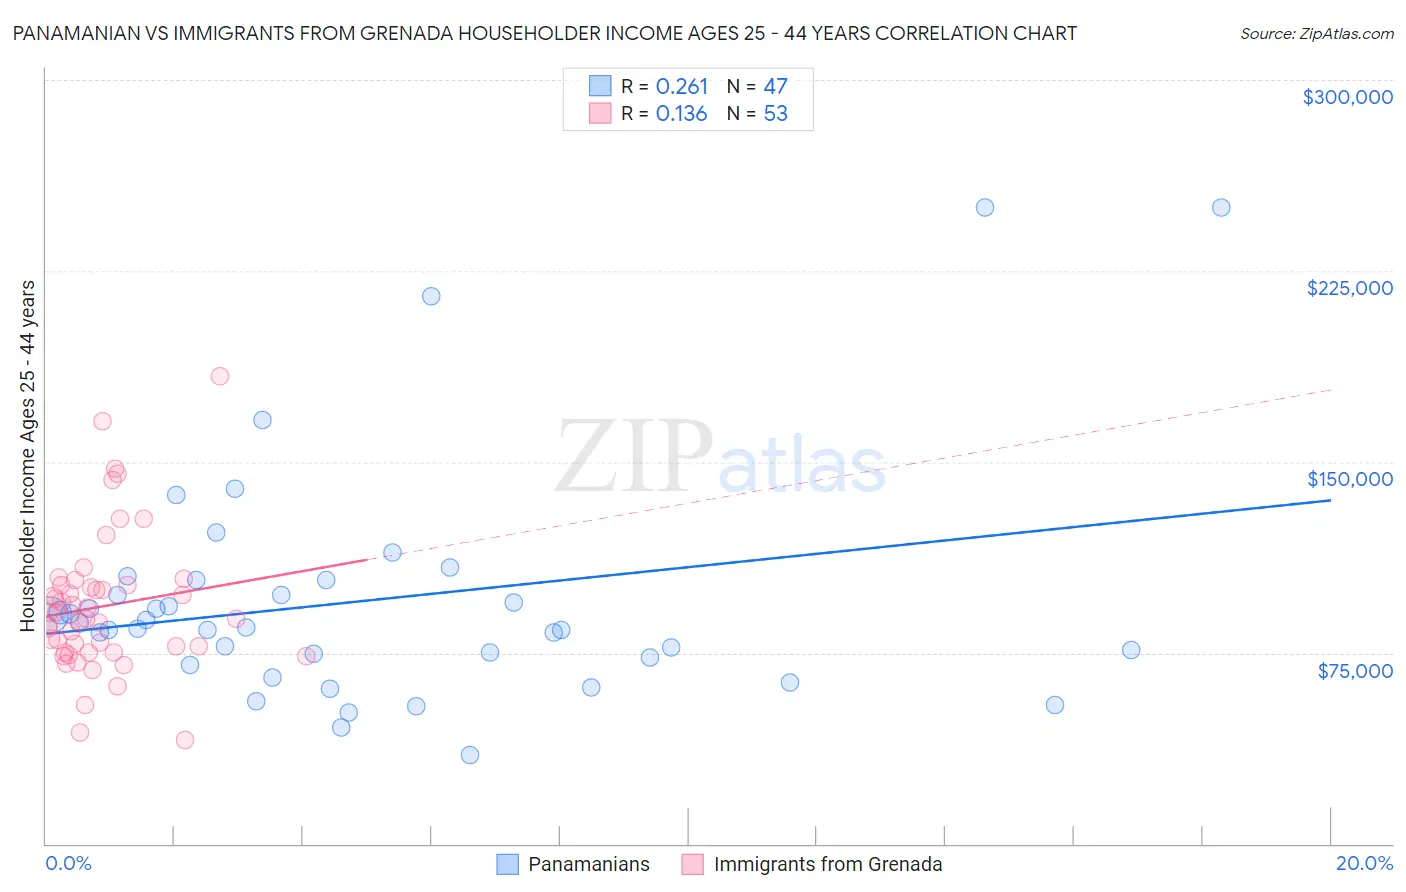 Panamanian vs Immigrants from Grenada Householder Income Ages 25 - 44 years